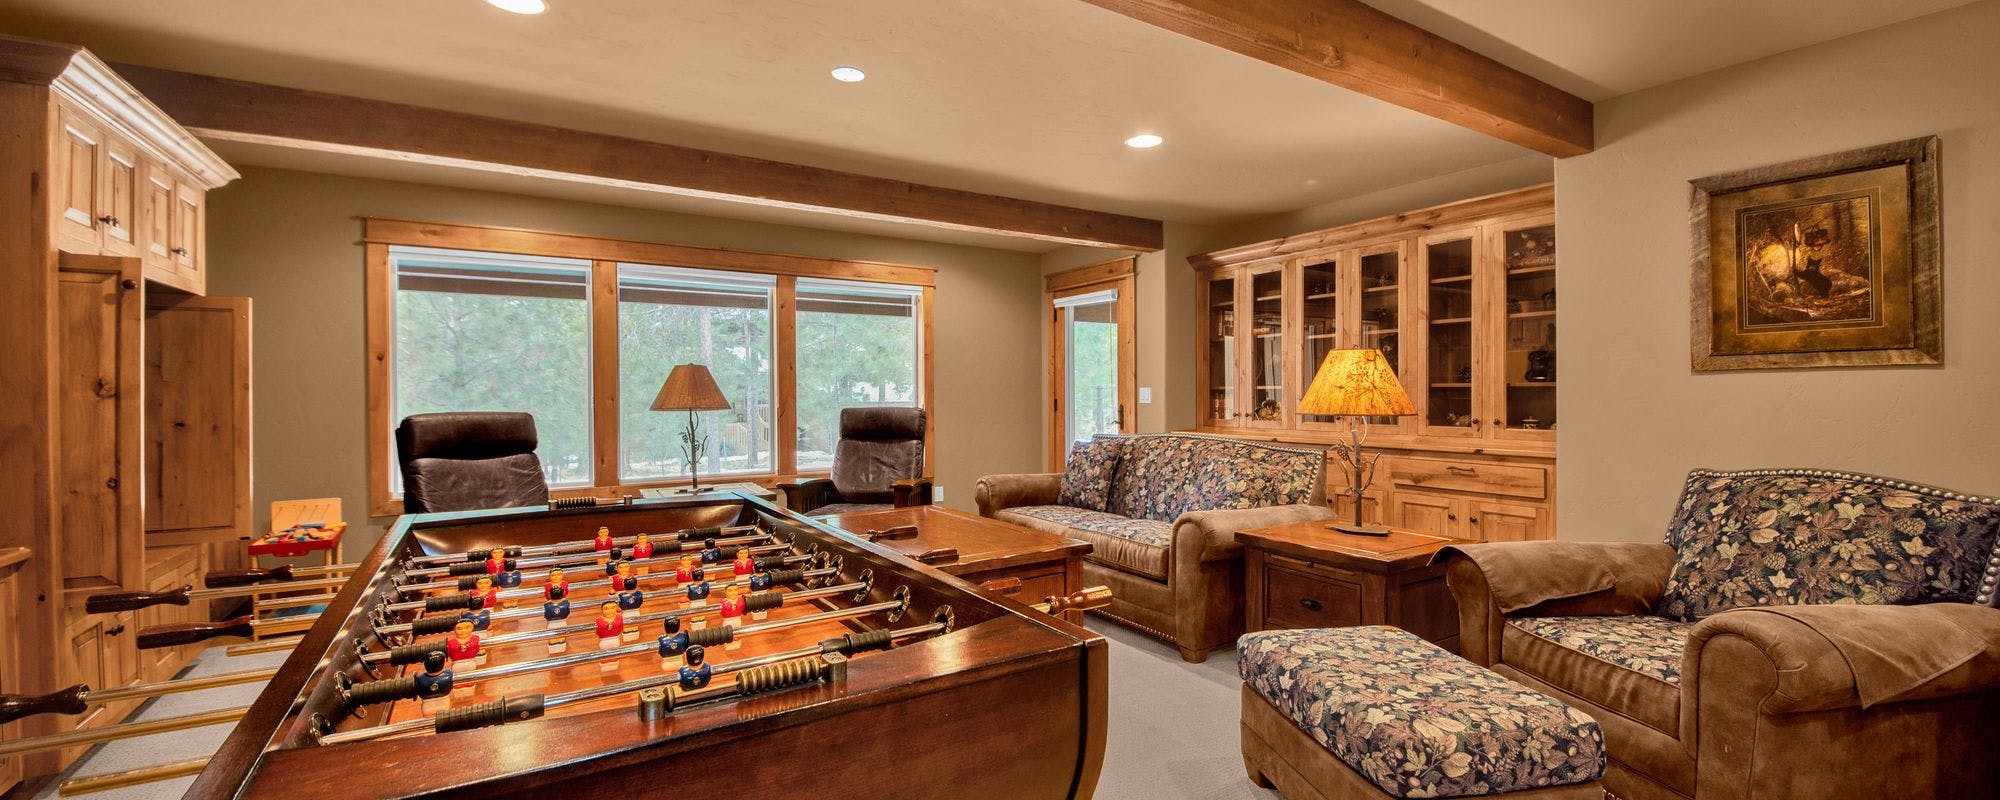 Cozy game room at a Cascara Vacation Rentals home.